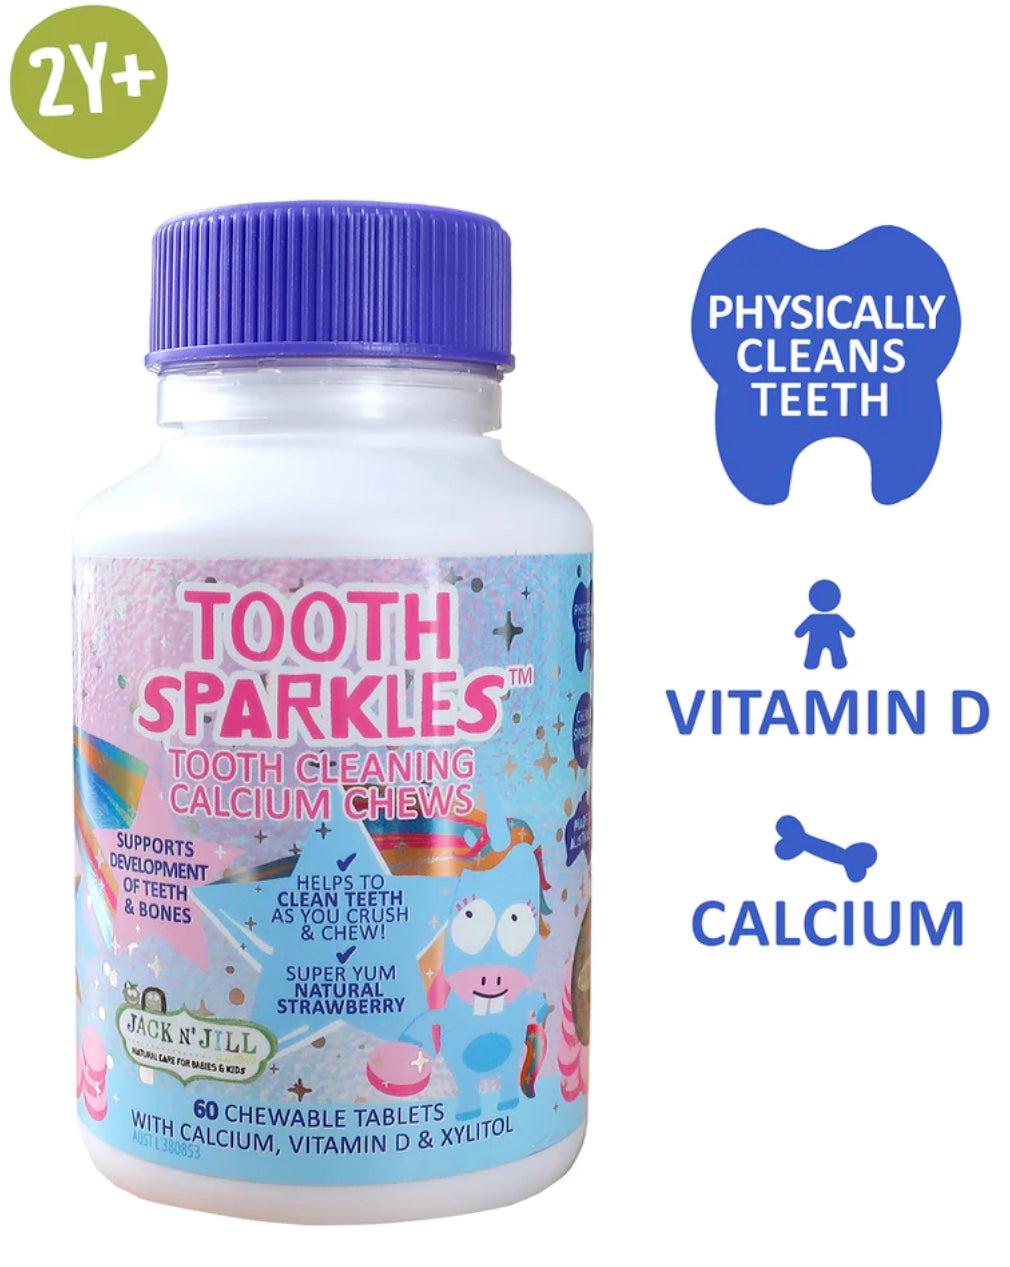 Tooth Sparkles Tooth Cleaning Calcium Chews